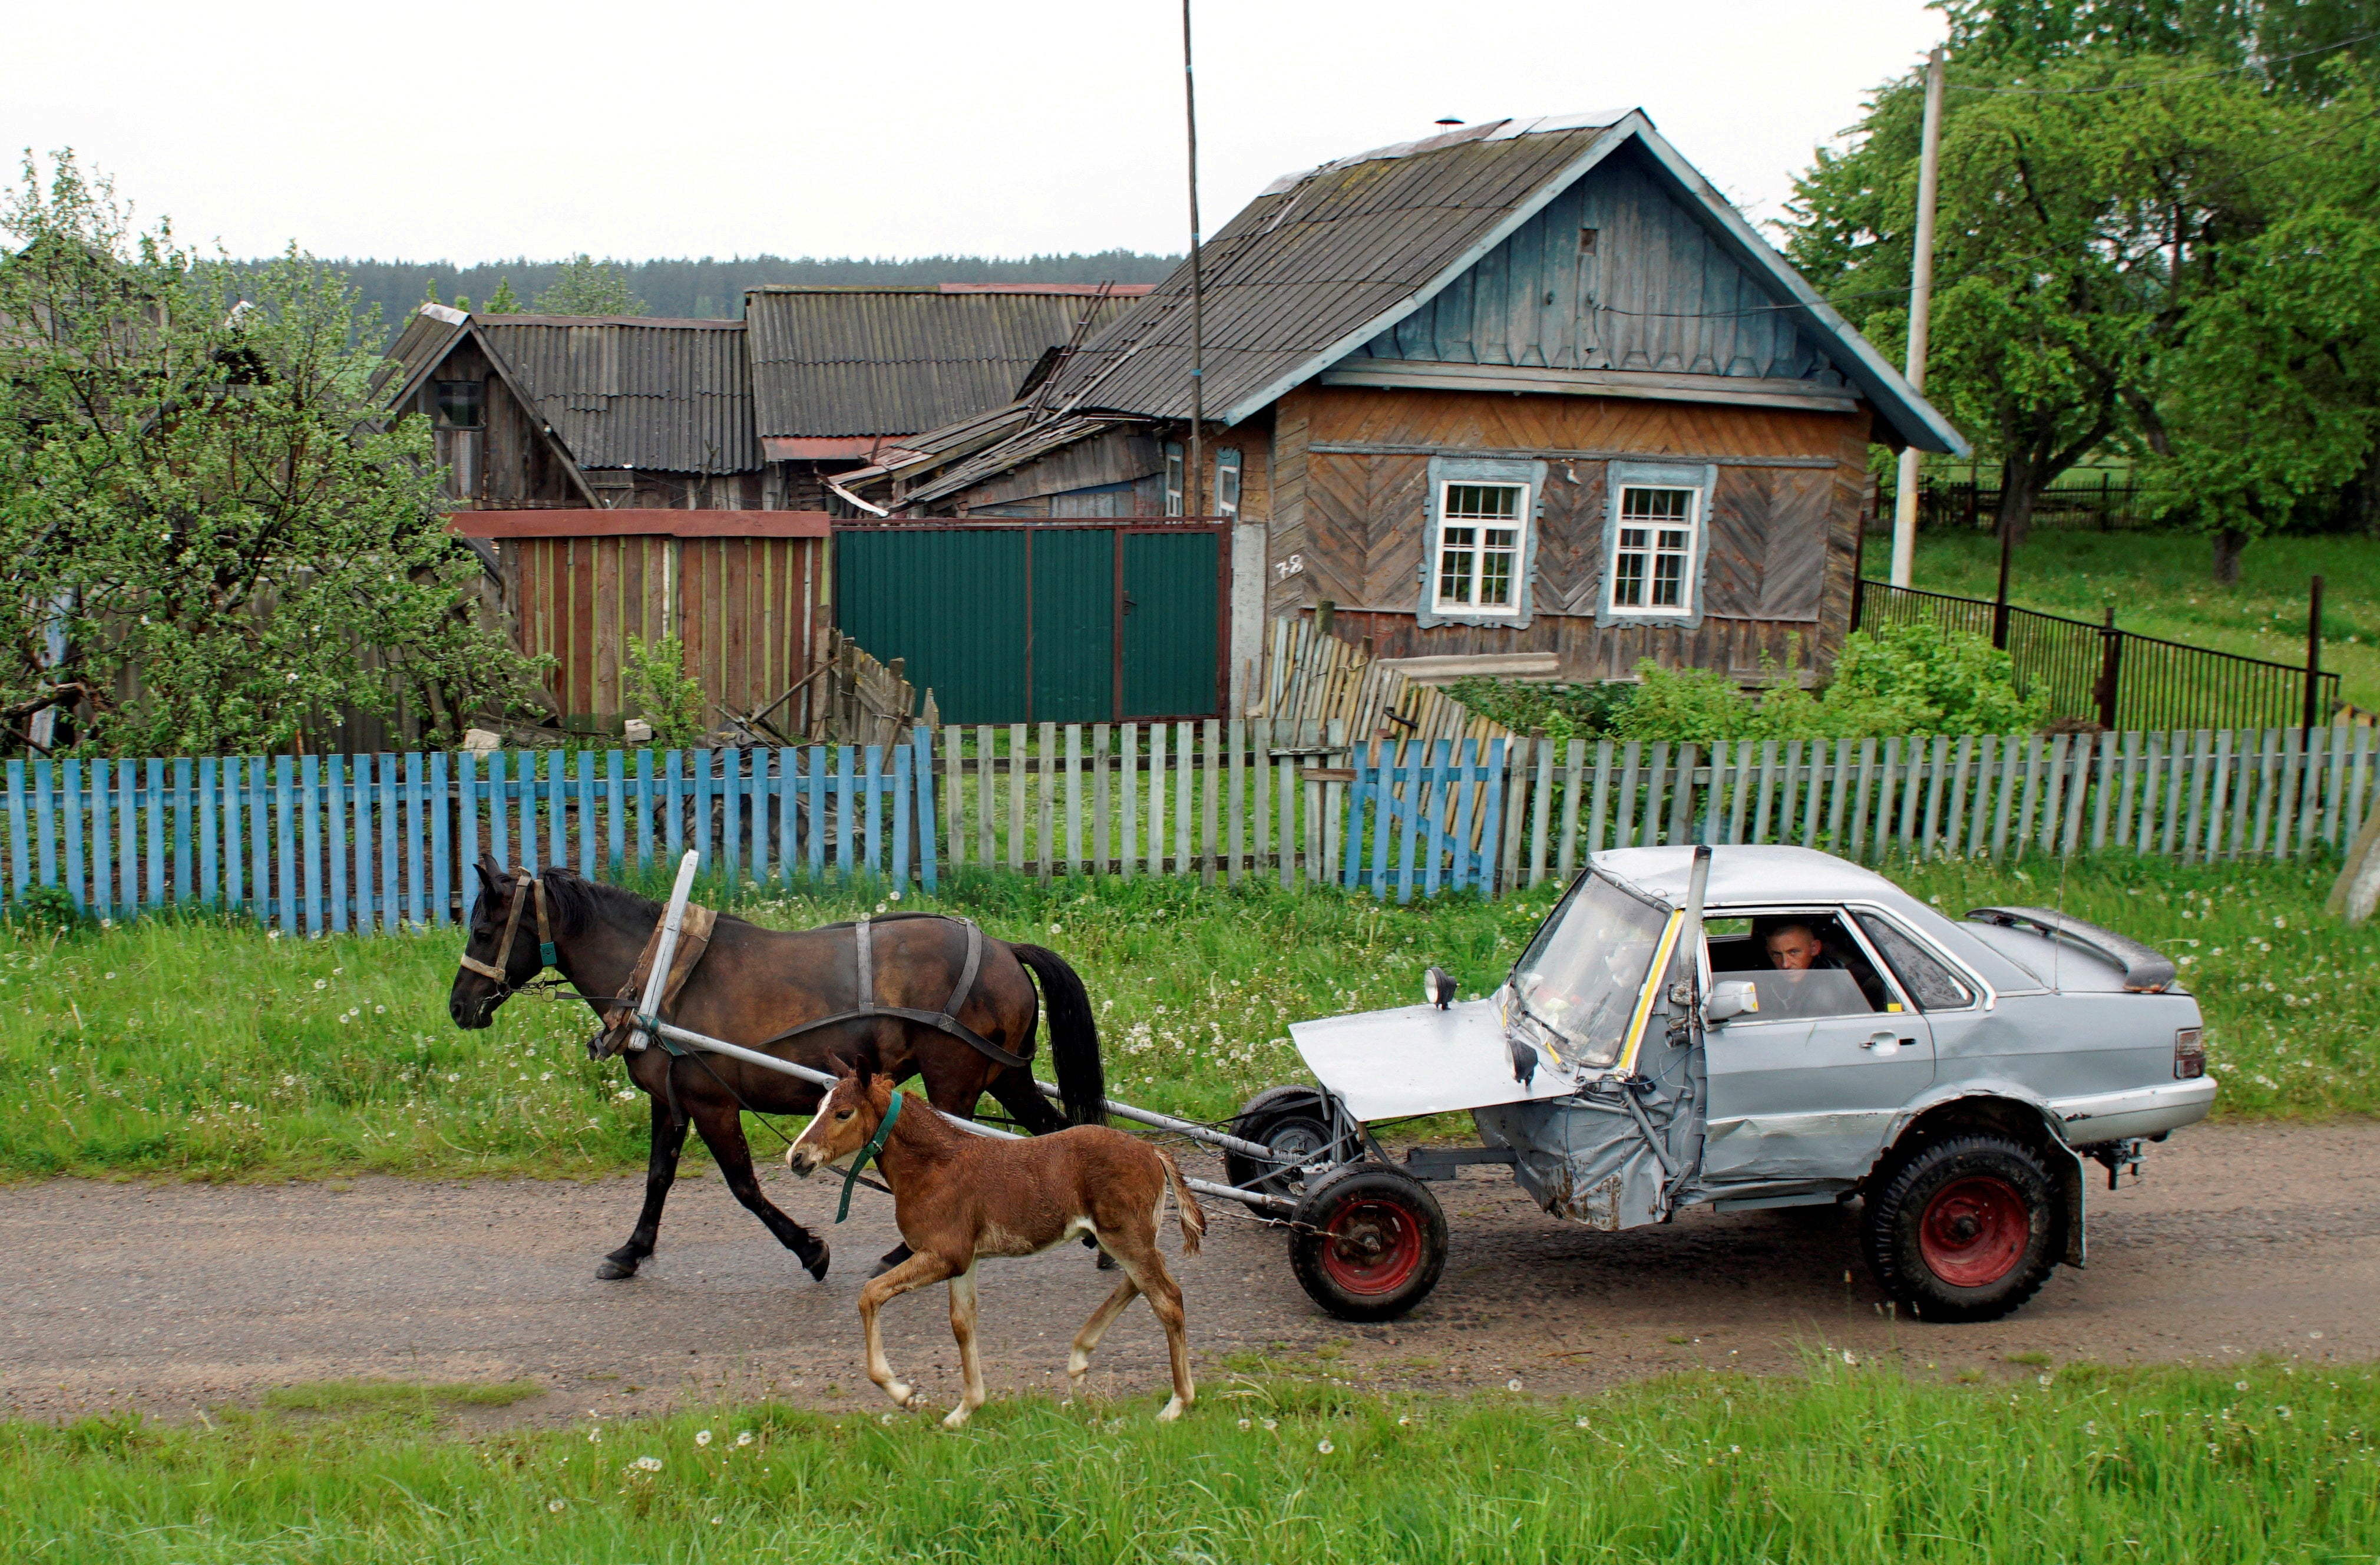 Alexey Usikov, 33, drives a horse-drawn carriage that he crafted out of an old Audi 80 in the village of Knyazhytsy, Belarus, in May